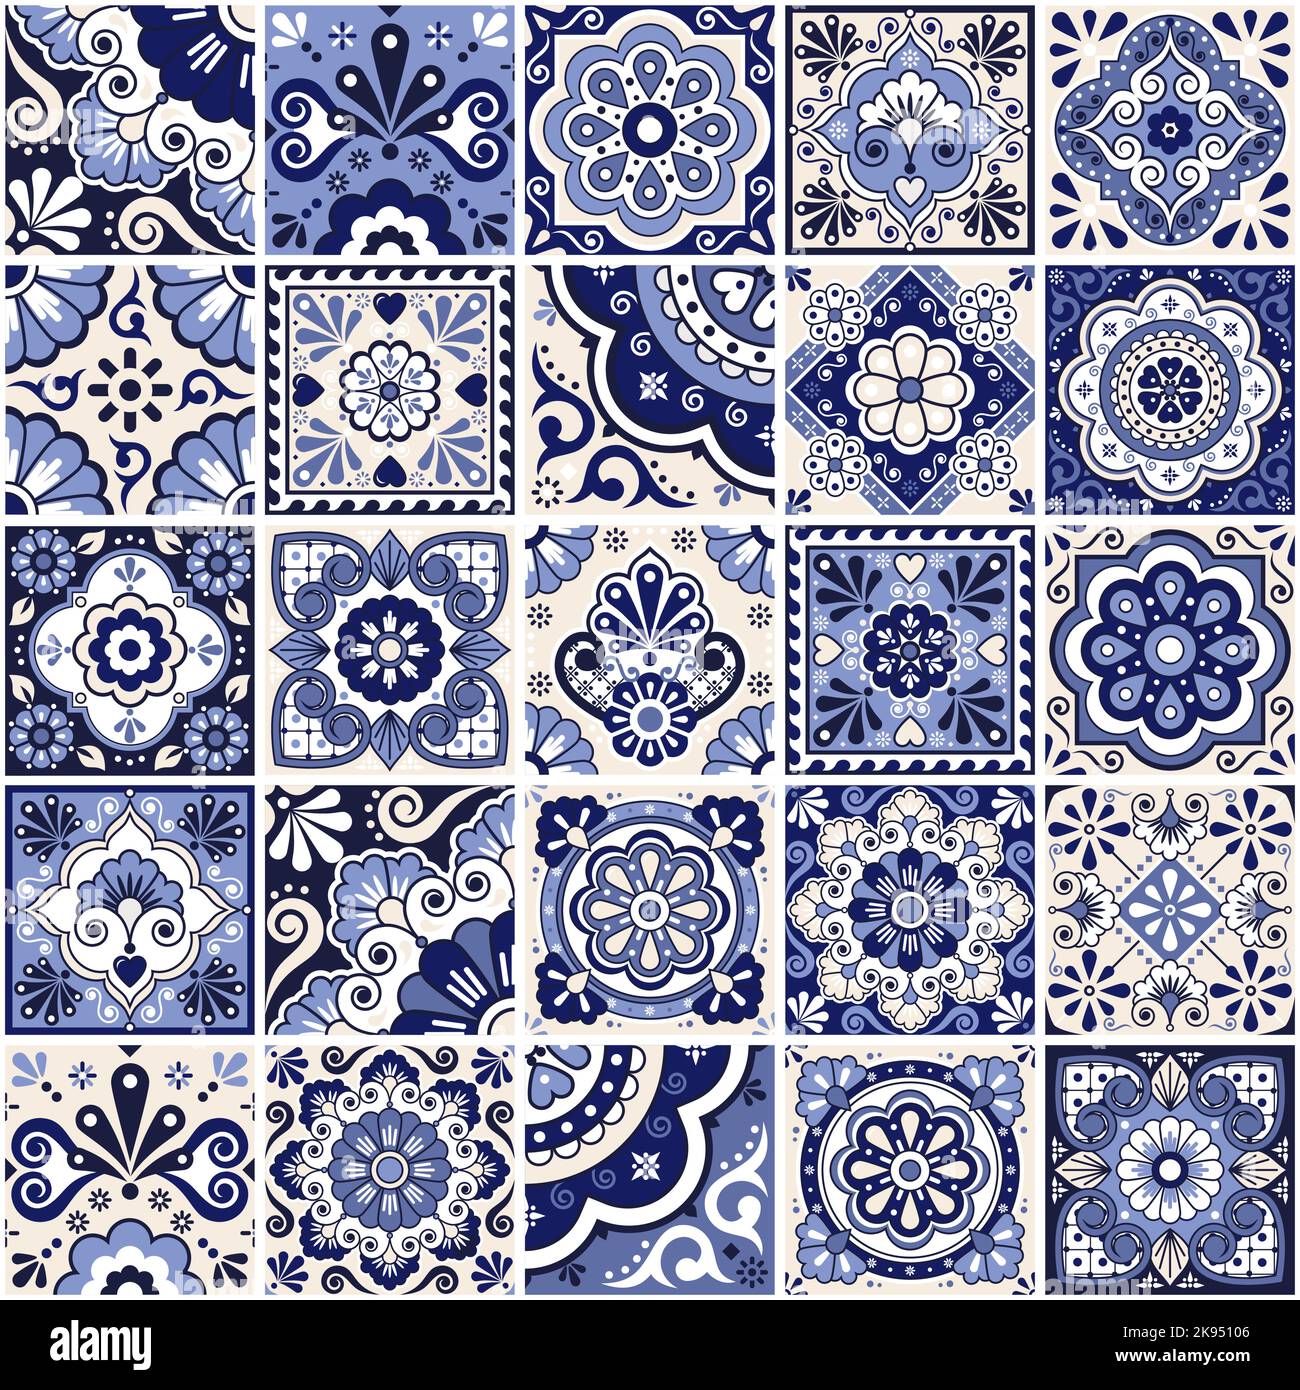 Mexican tiles seamless vector pattern - big set of navy blue talavera inspired designs perfect for wallpapers, home decor, textiles or fabric prints Stock Vector